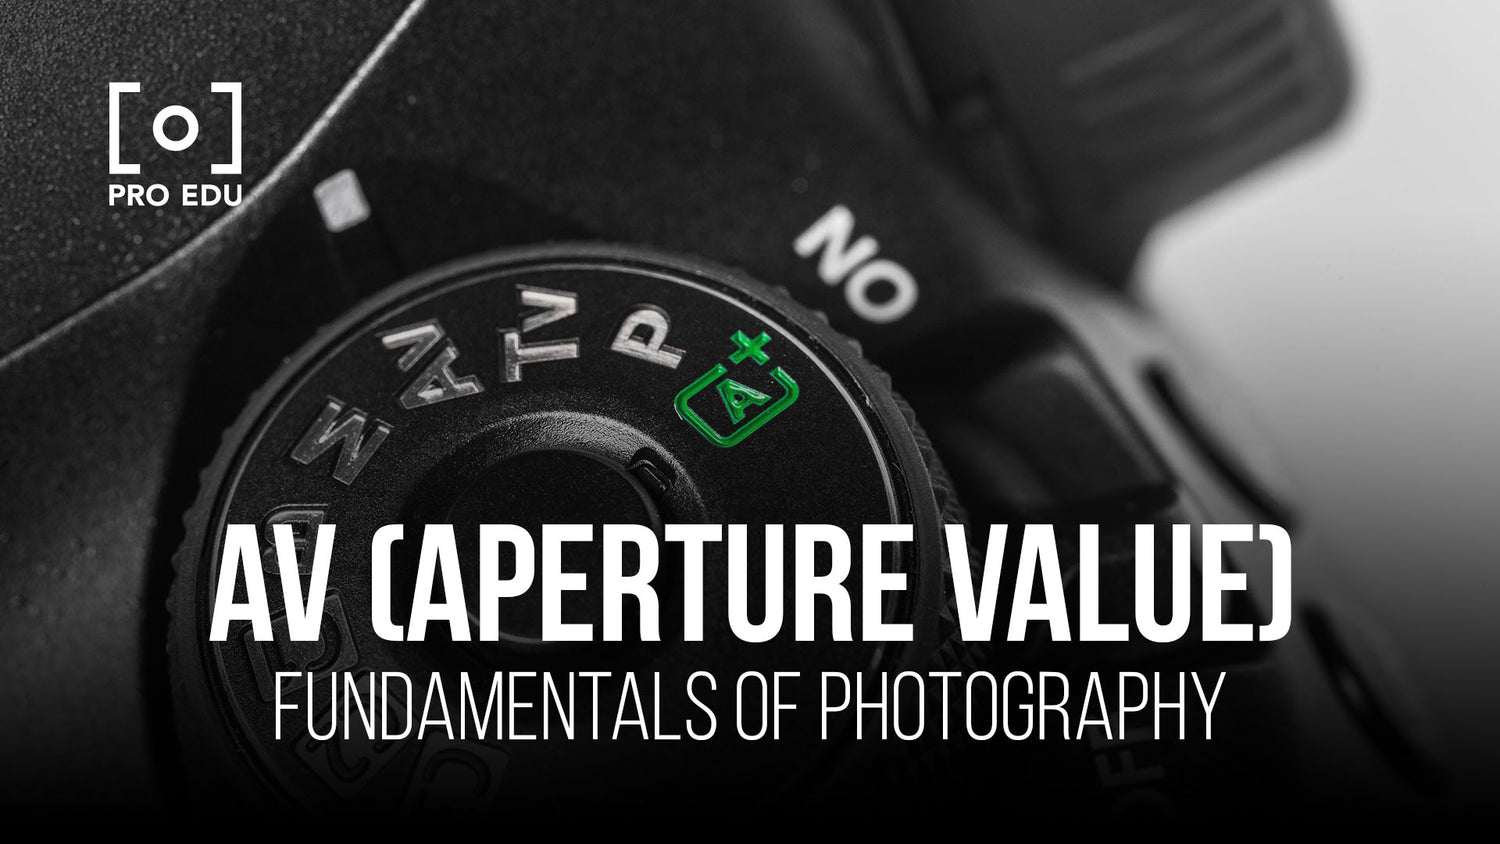 Controlling depth of field and exposure through AV mode in photography, a beginner's guide